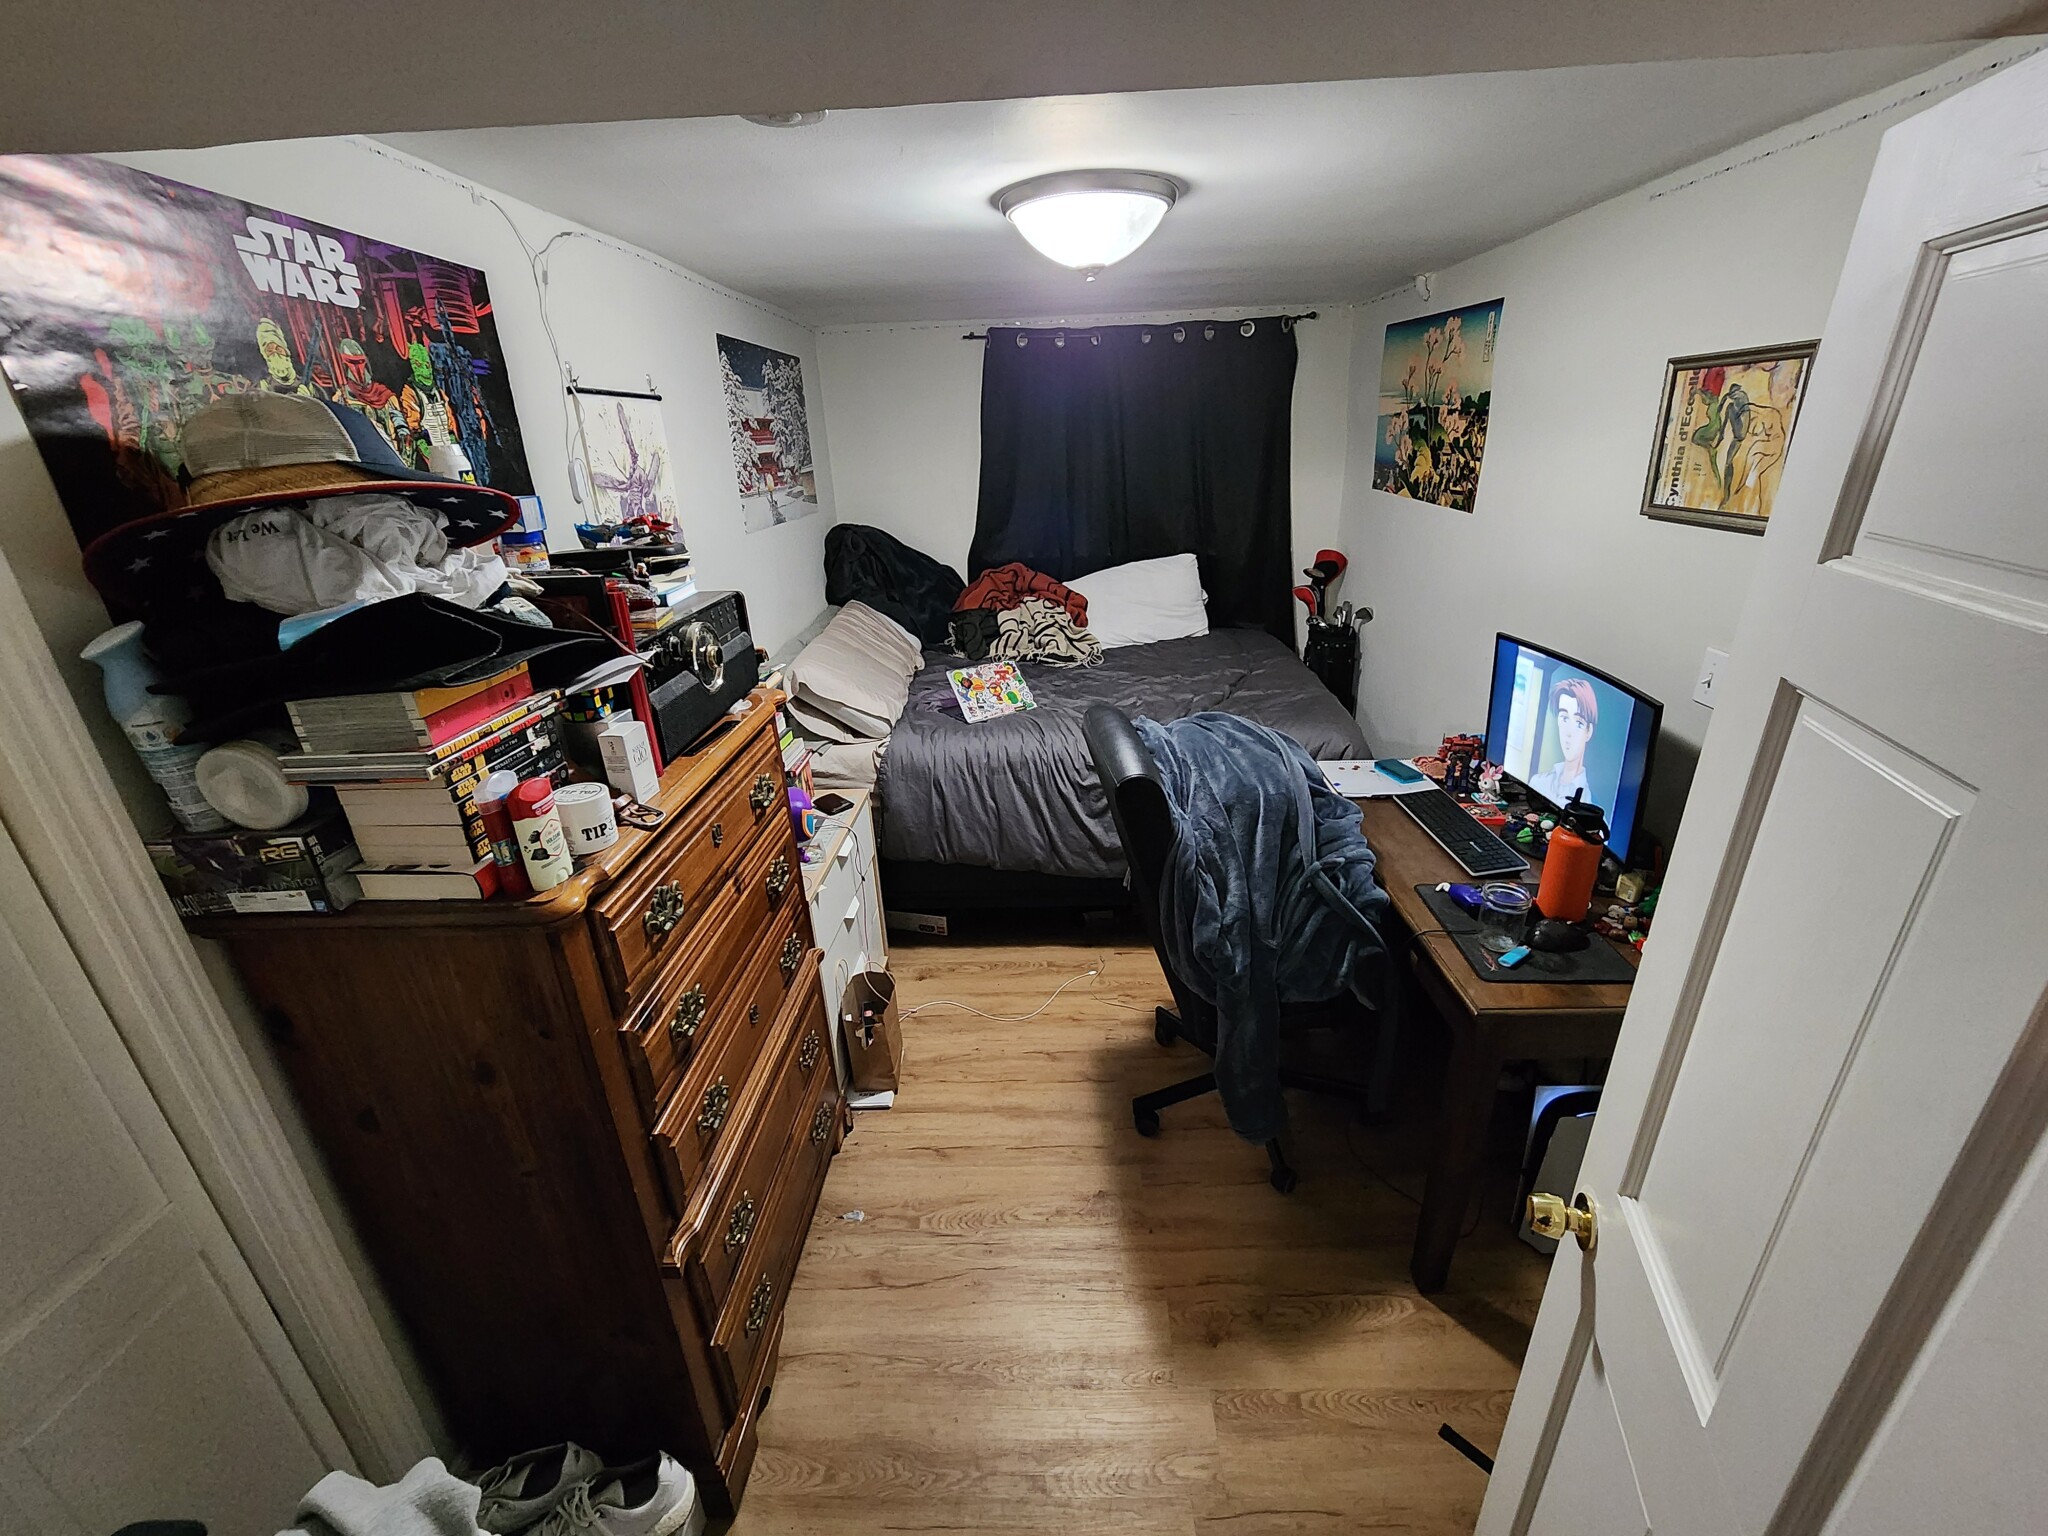 Photos of apartment on Chiswick Rd.,Boston MA 02135